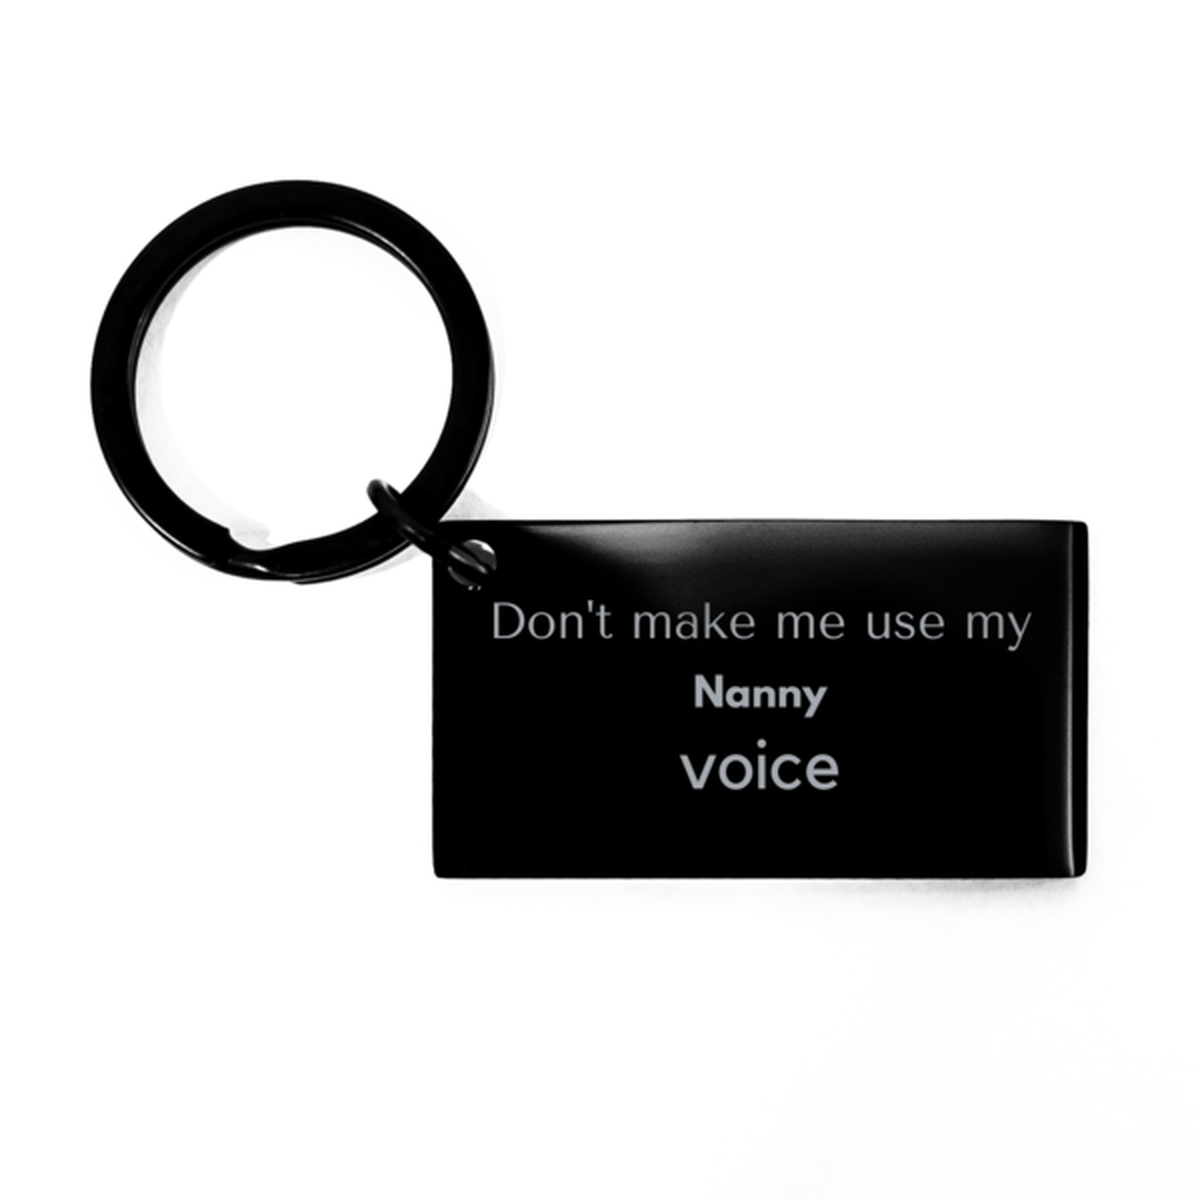 Don't make me use my Nanny voice, Sarcasm Nanny Gifts, Christmas Nanny Keychain Birthday Unique Gifts For Nanny Coworkers, Men, Women, Colleague, Friends